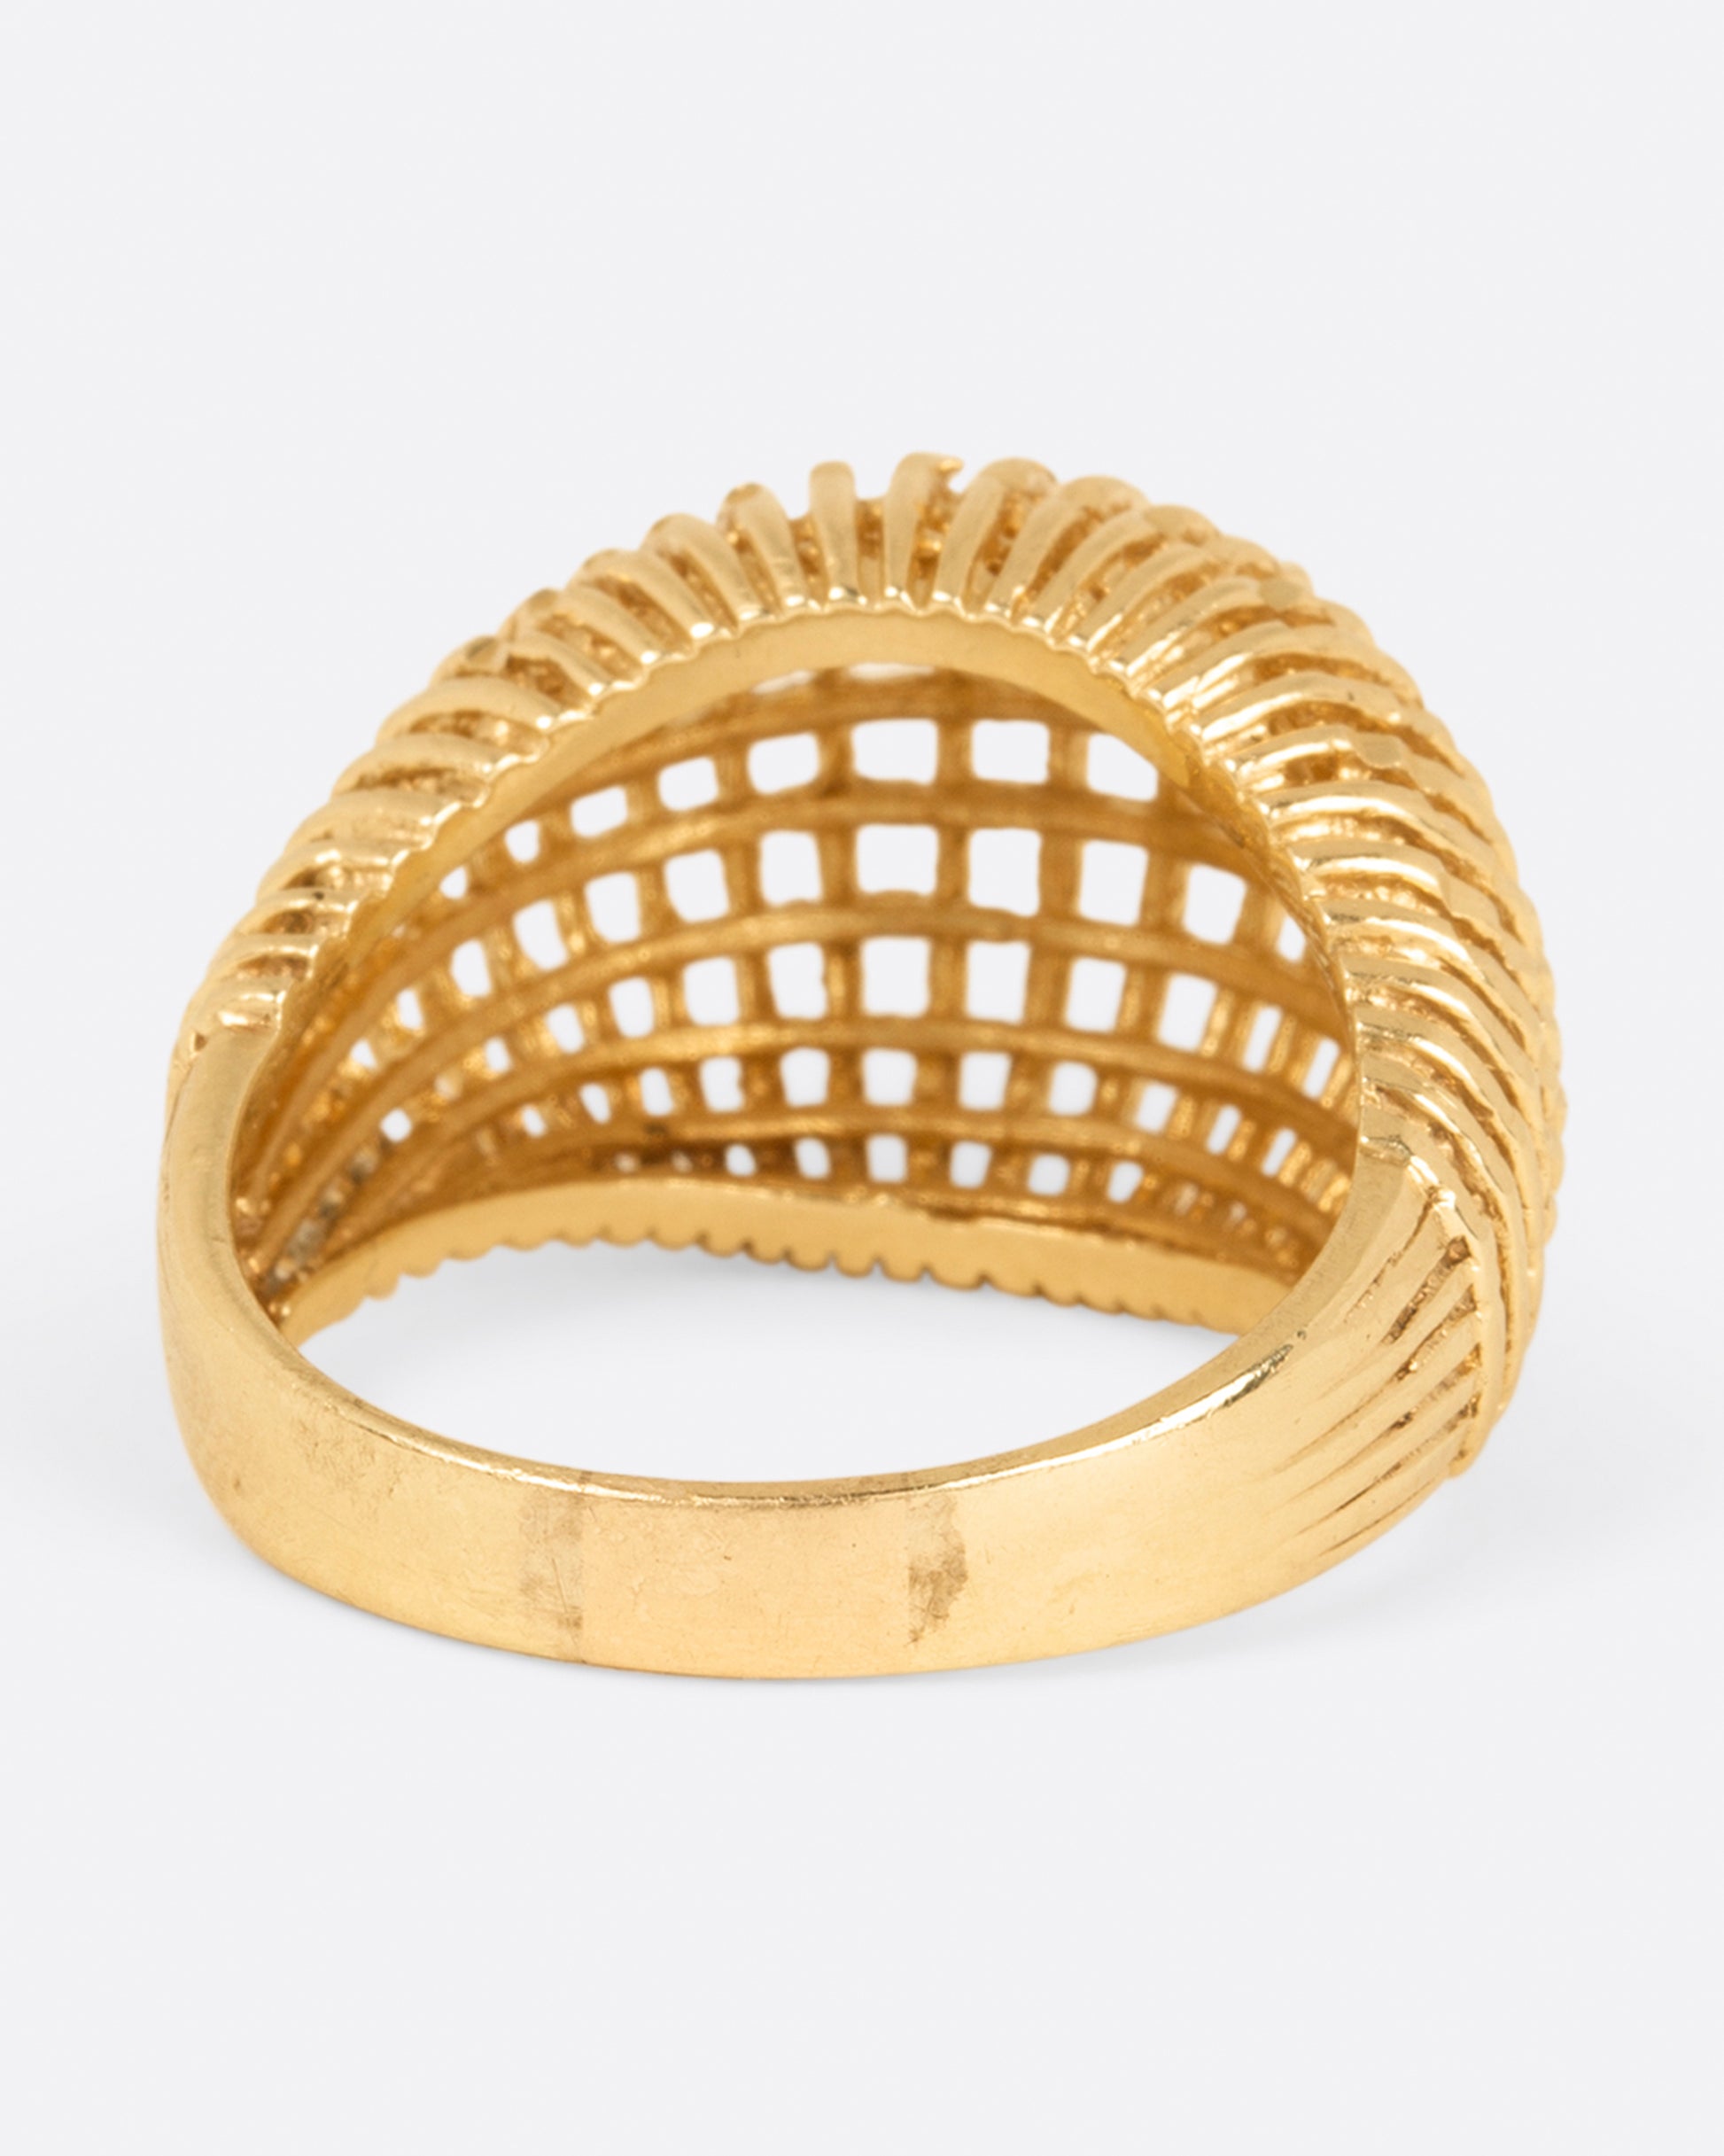 A woven yellow gold dome ring, shown from the back.